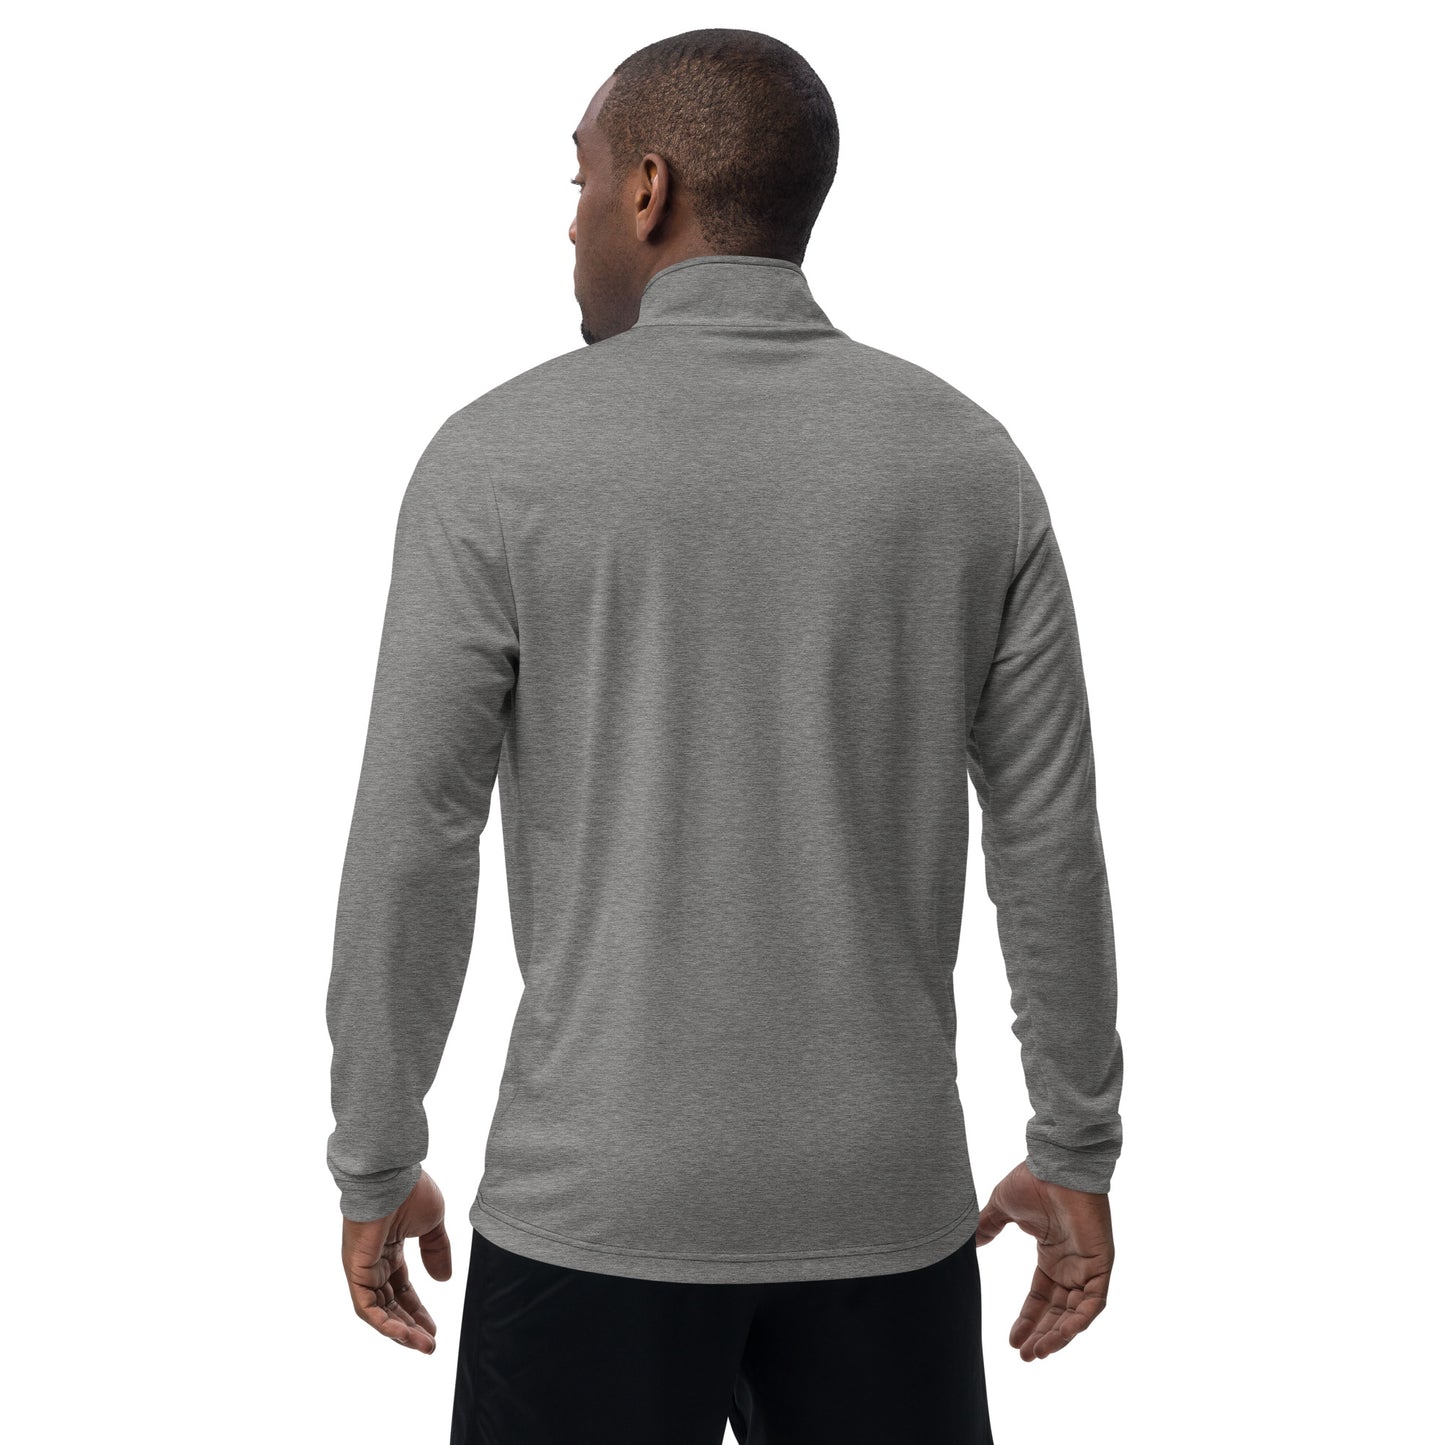 The 'Fast Load" Quarter Zip Pullover